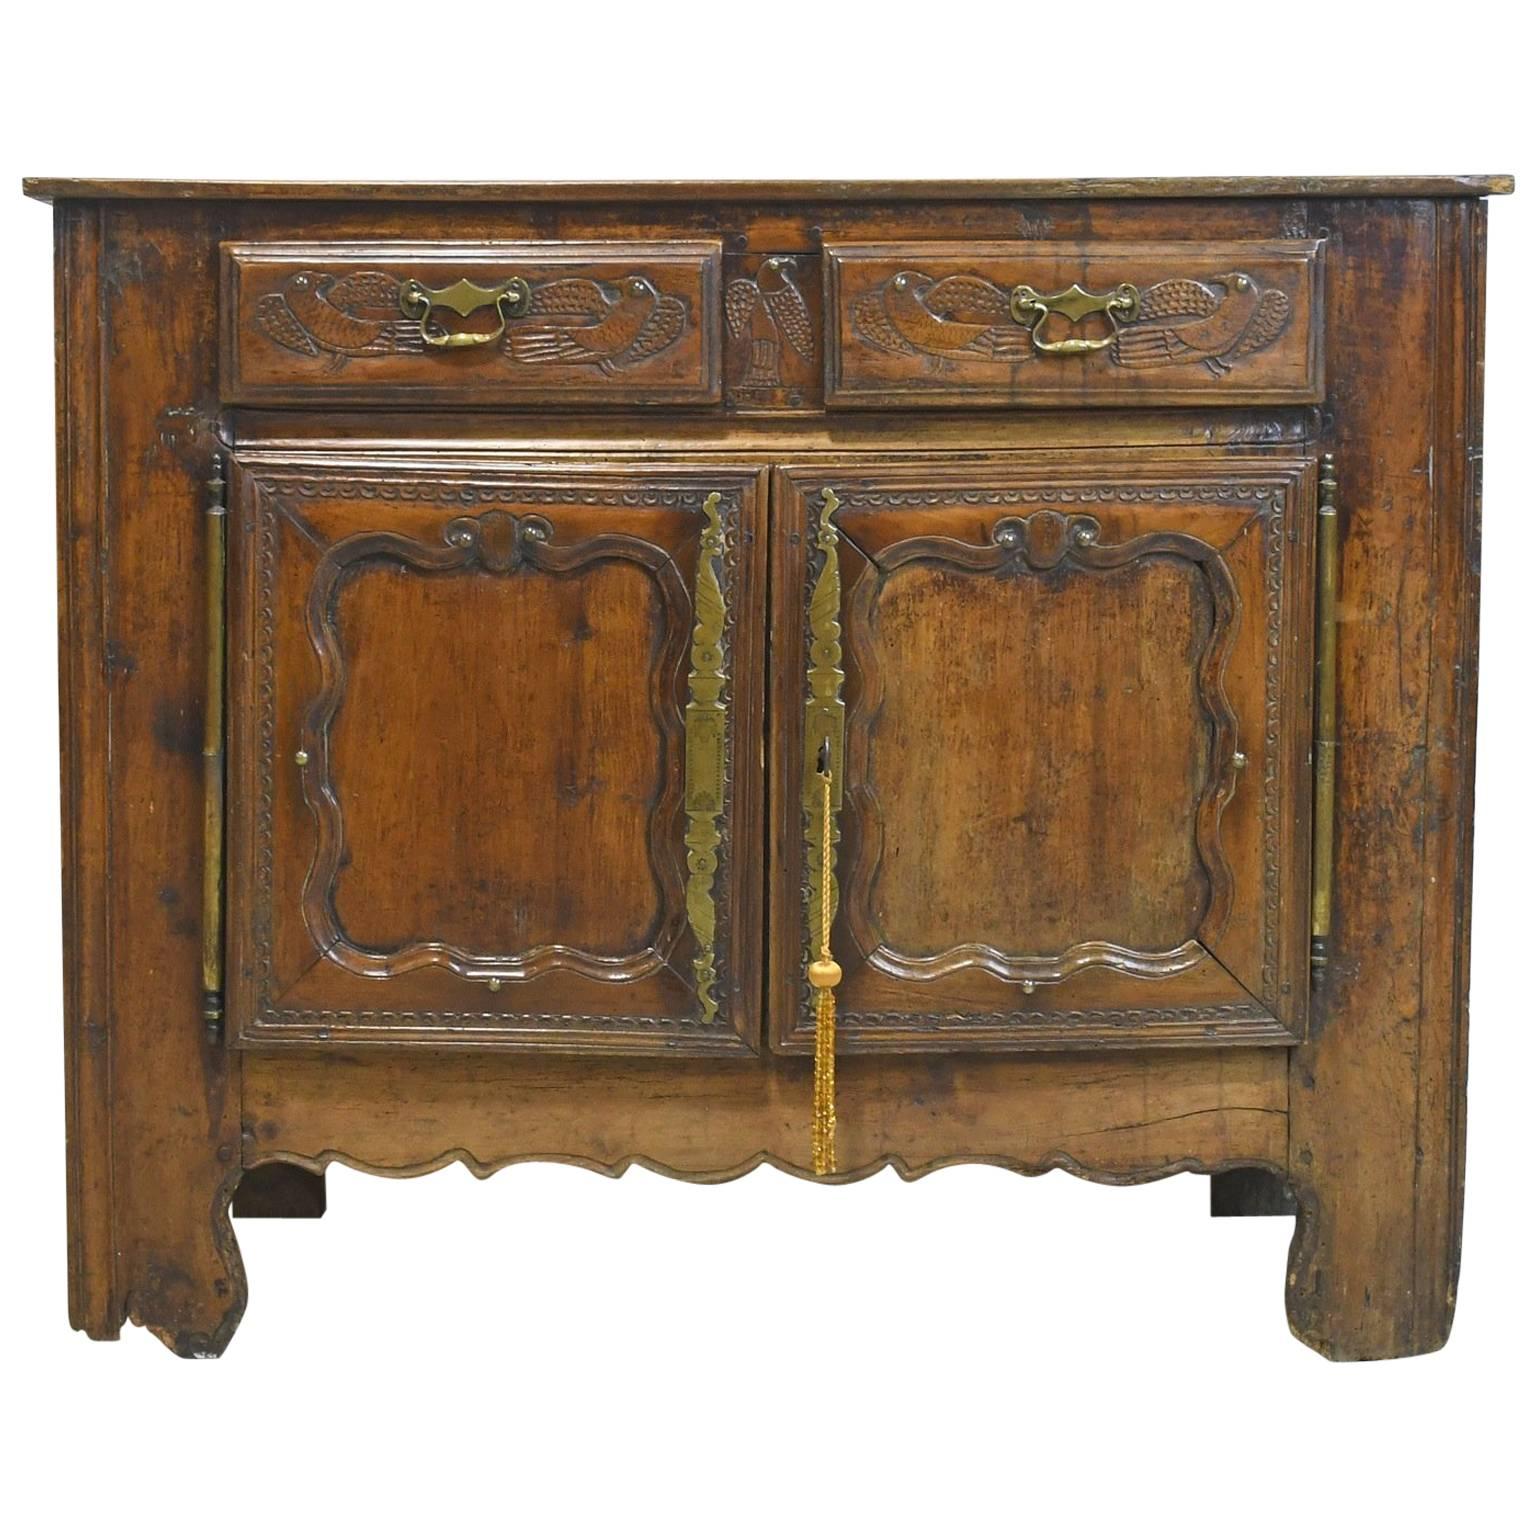 18th Century French Buffet in Walnut with Carvings of Birds